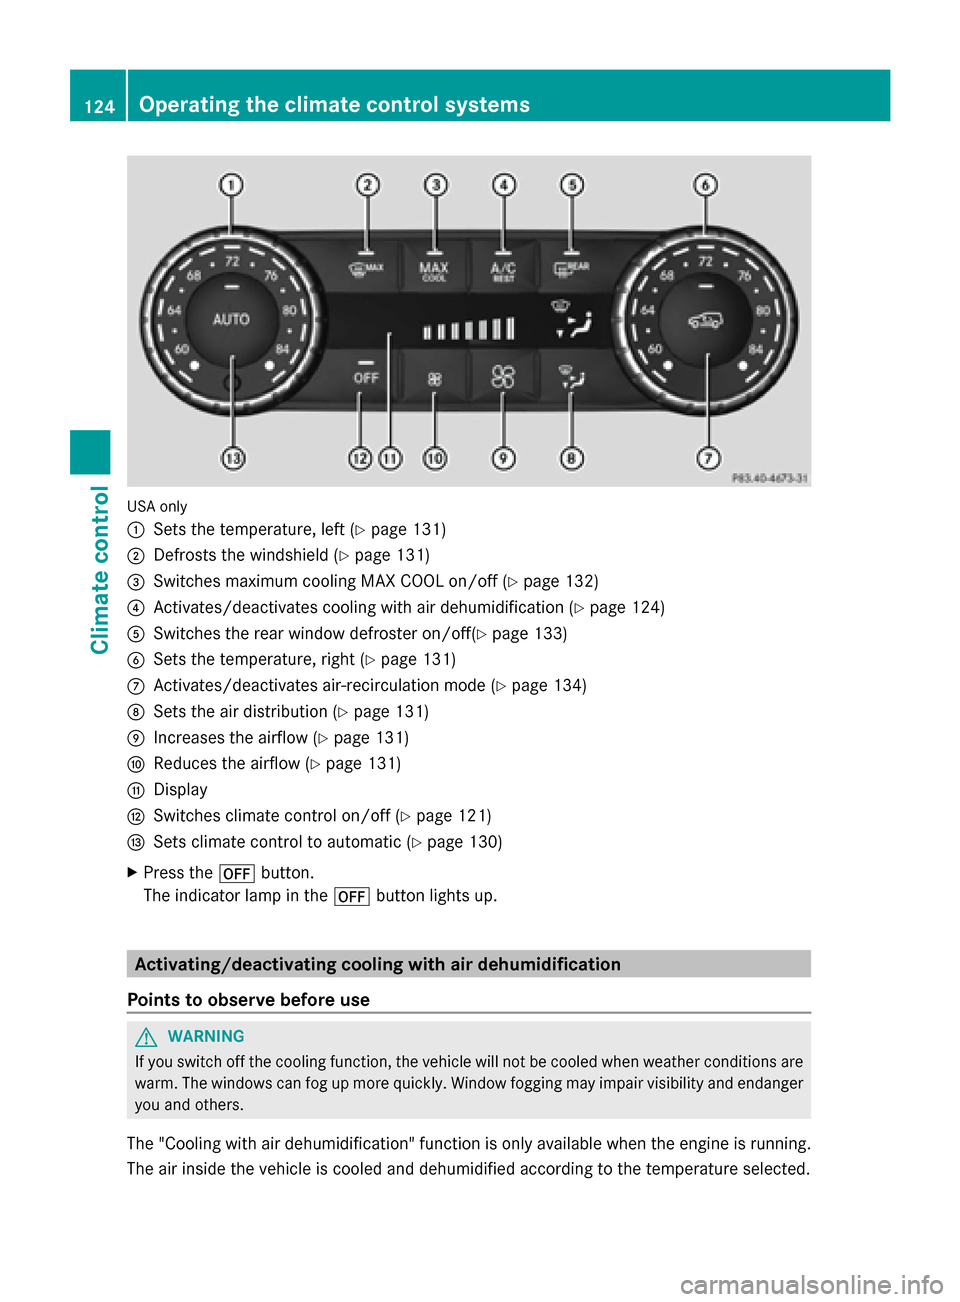 MERCEDES-BENZ G-Class 2014 W463 Owners Manual USA only
0043
Sets the temperature, left (Y page 131)
0044 Defrosts the windshield (Y page 131)
0087 Switches maximum cooling MAX COOL on/off (Y page 132)
0085 Activates/deactivates cooling with air d